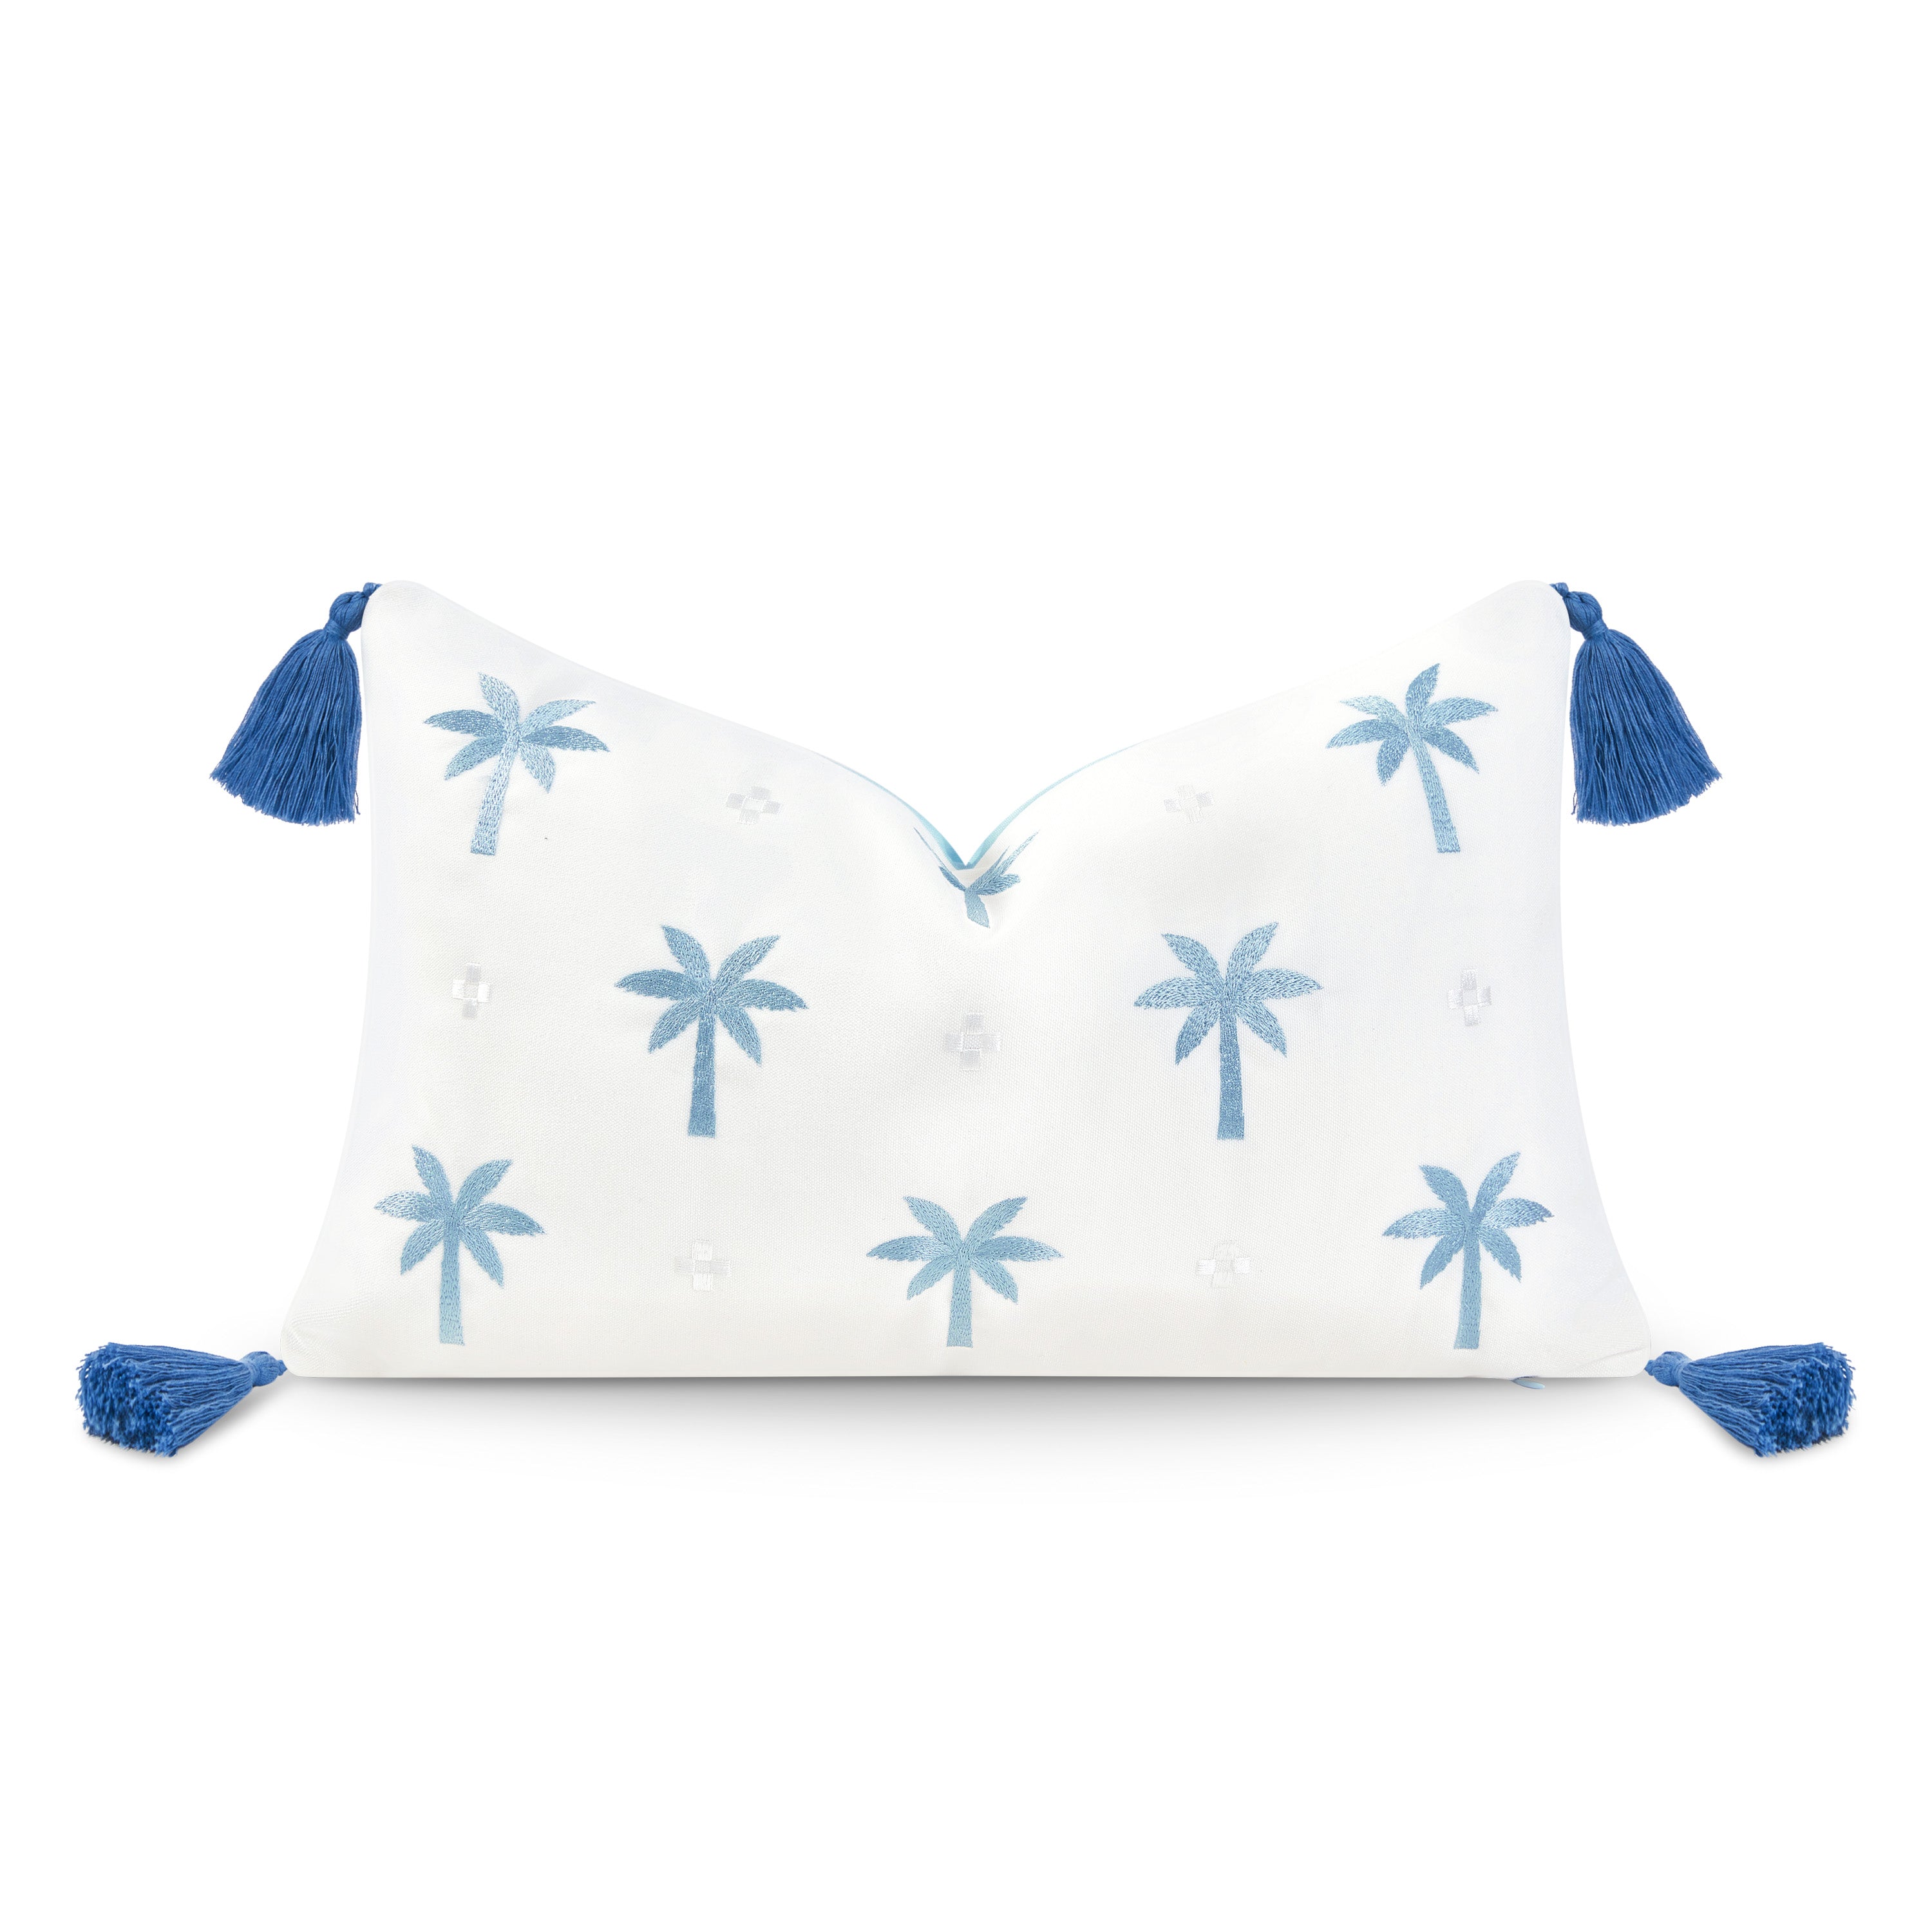 Coastal Hampton Style Indoor Outdoor Lumbar Pillow Cover, Embroidered Palm Tree Tassel, Baby Blue, 12"x20"